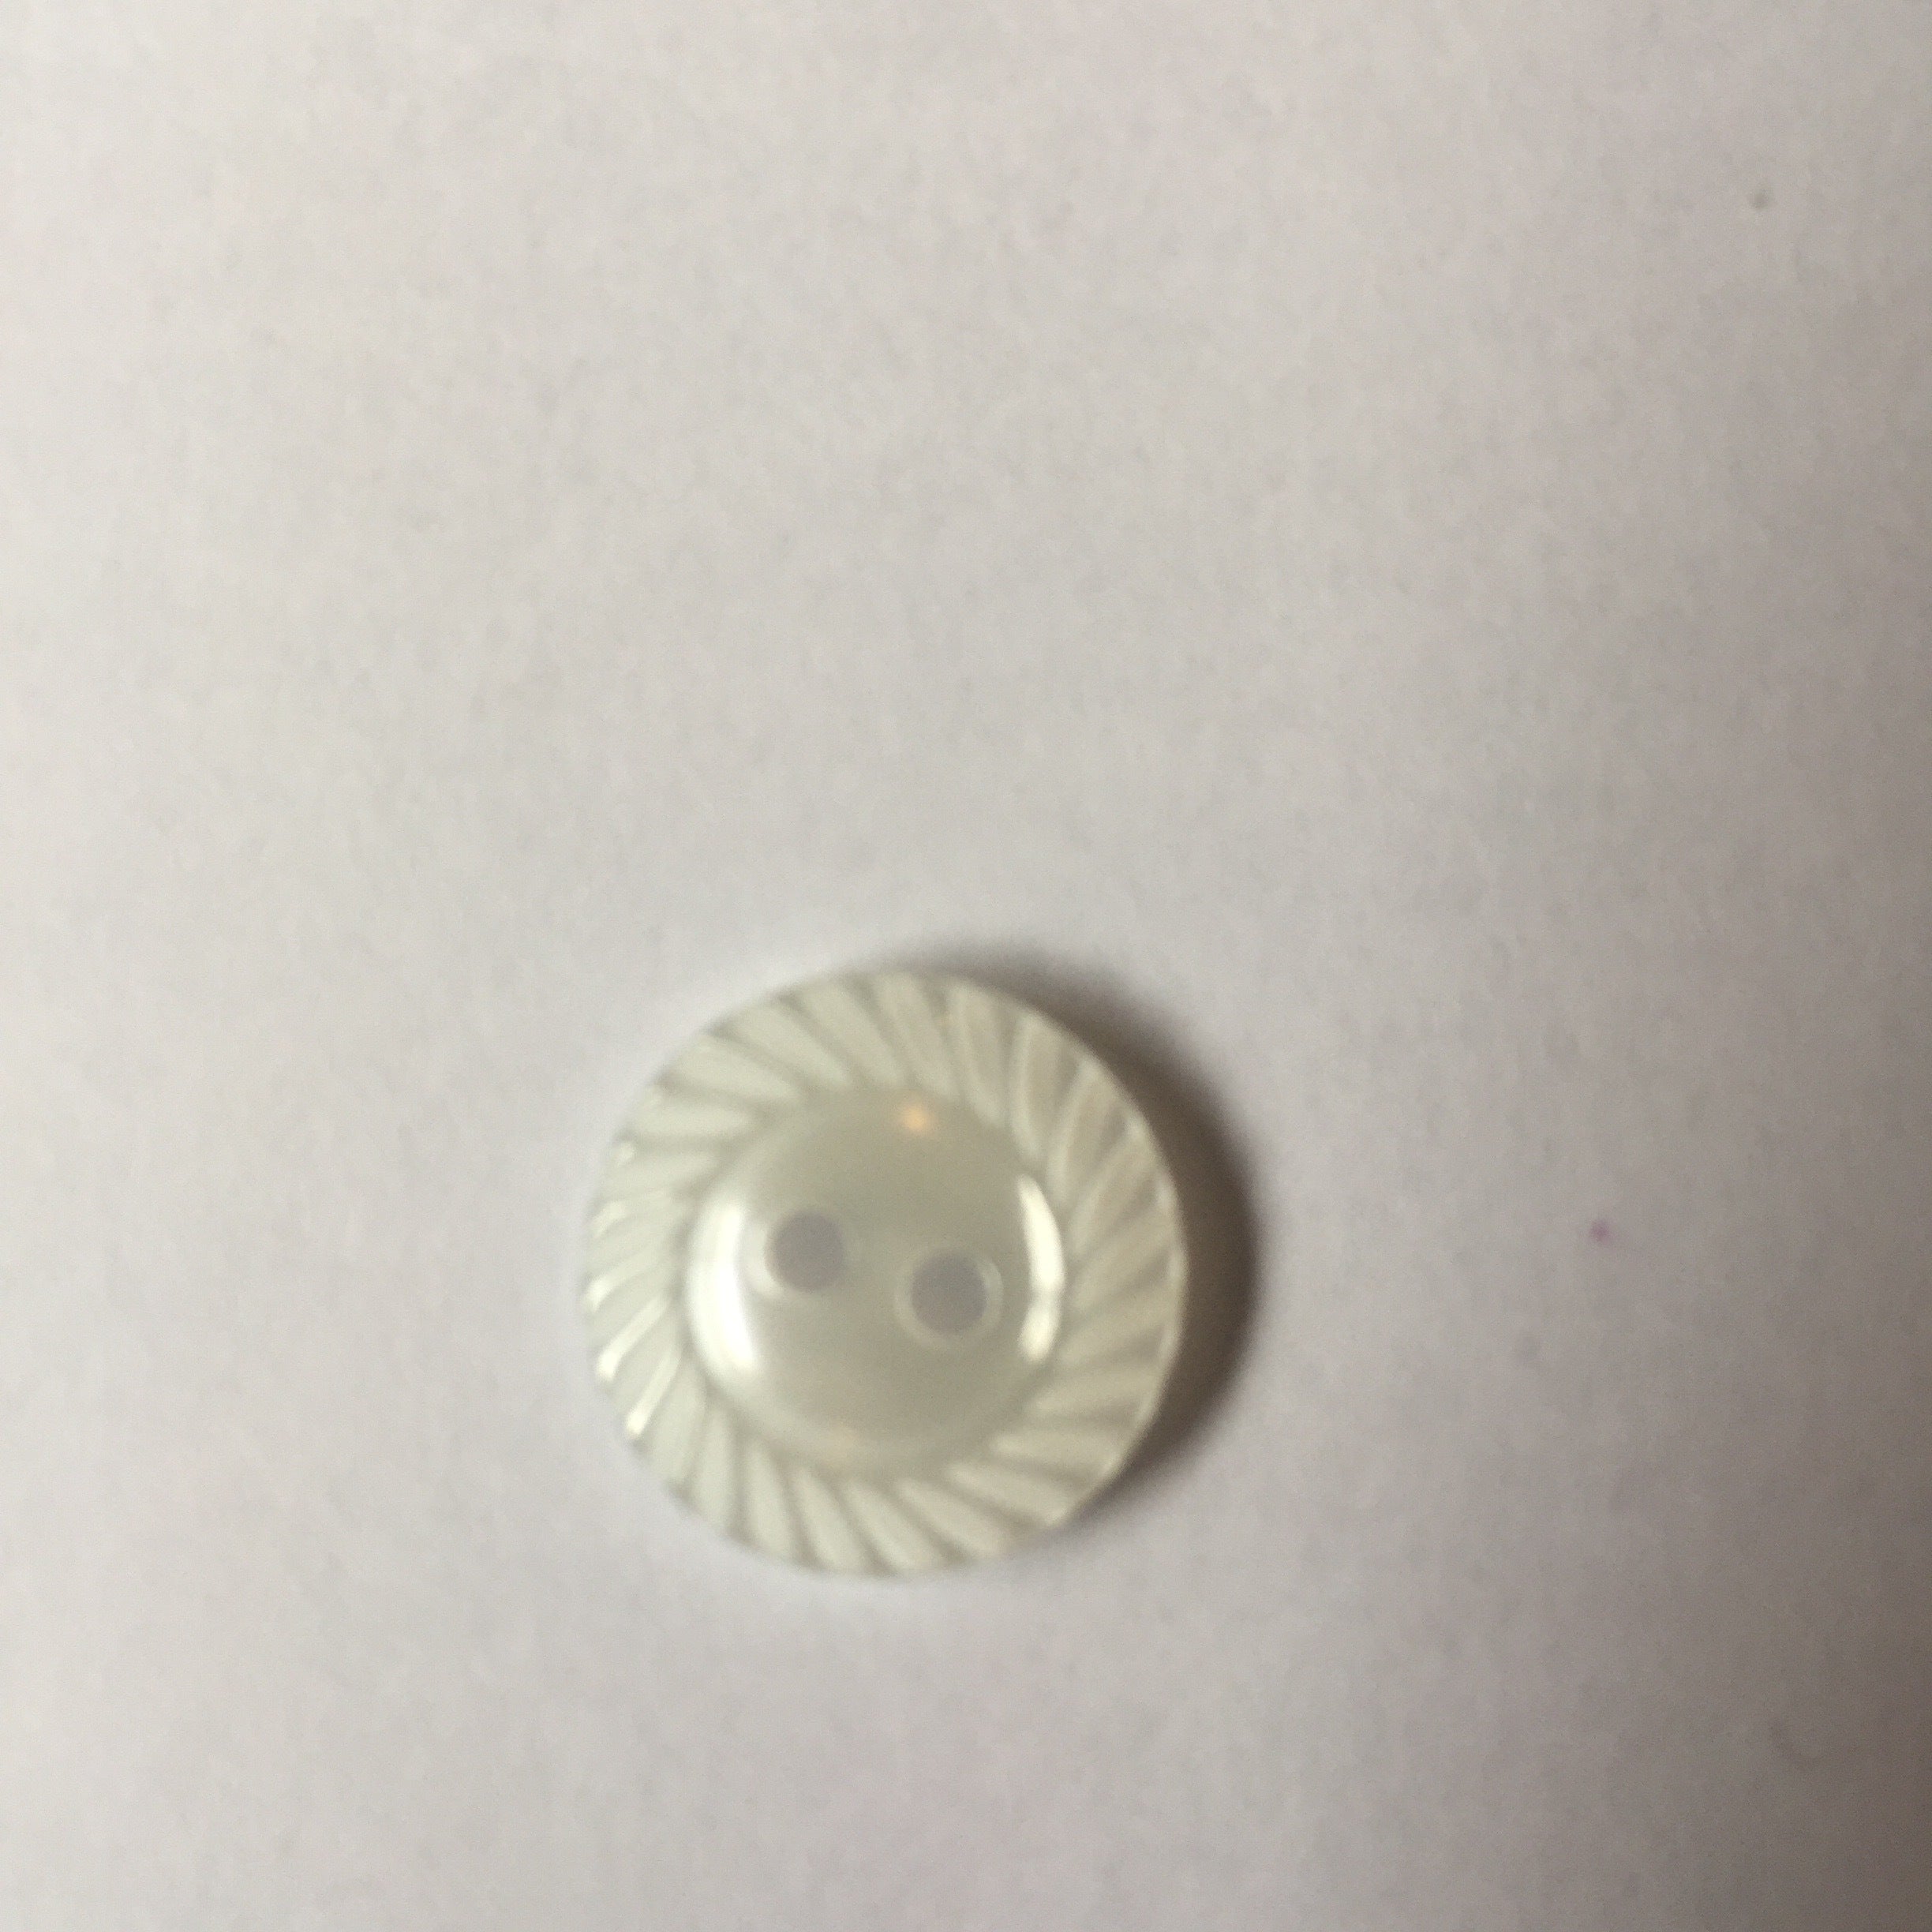 Mill-edge plastic buttons